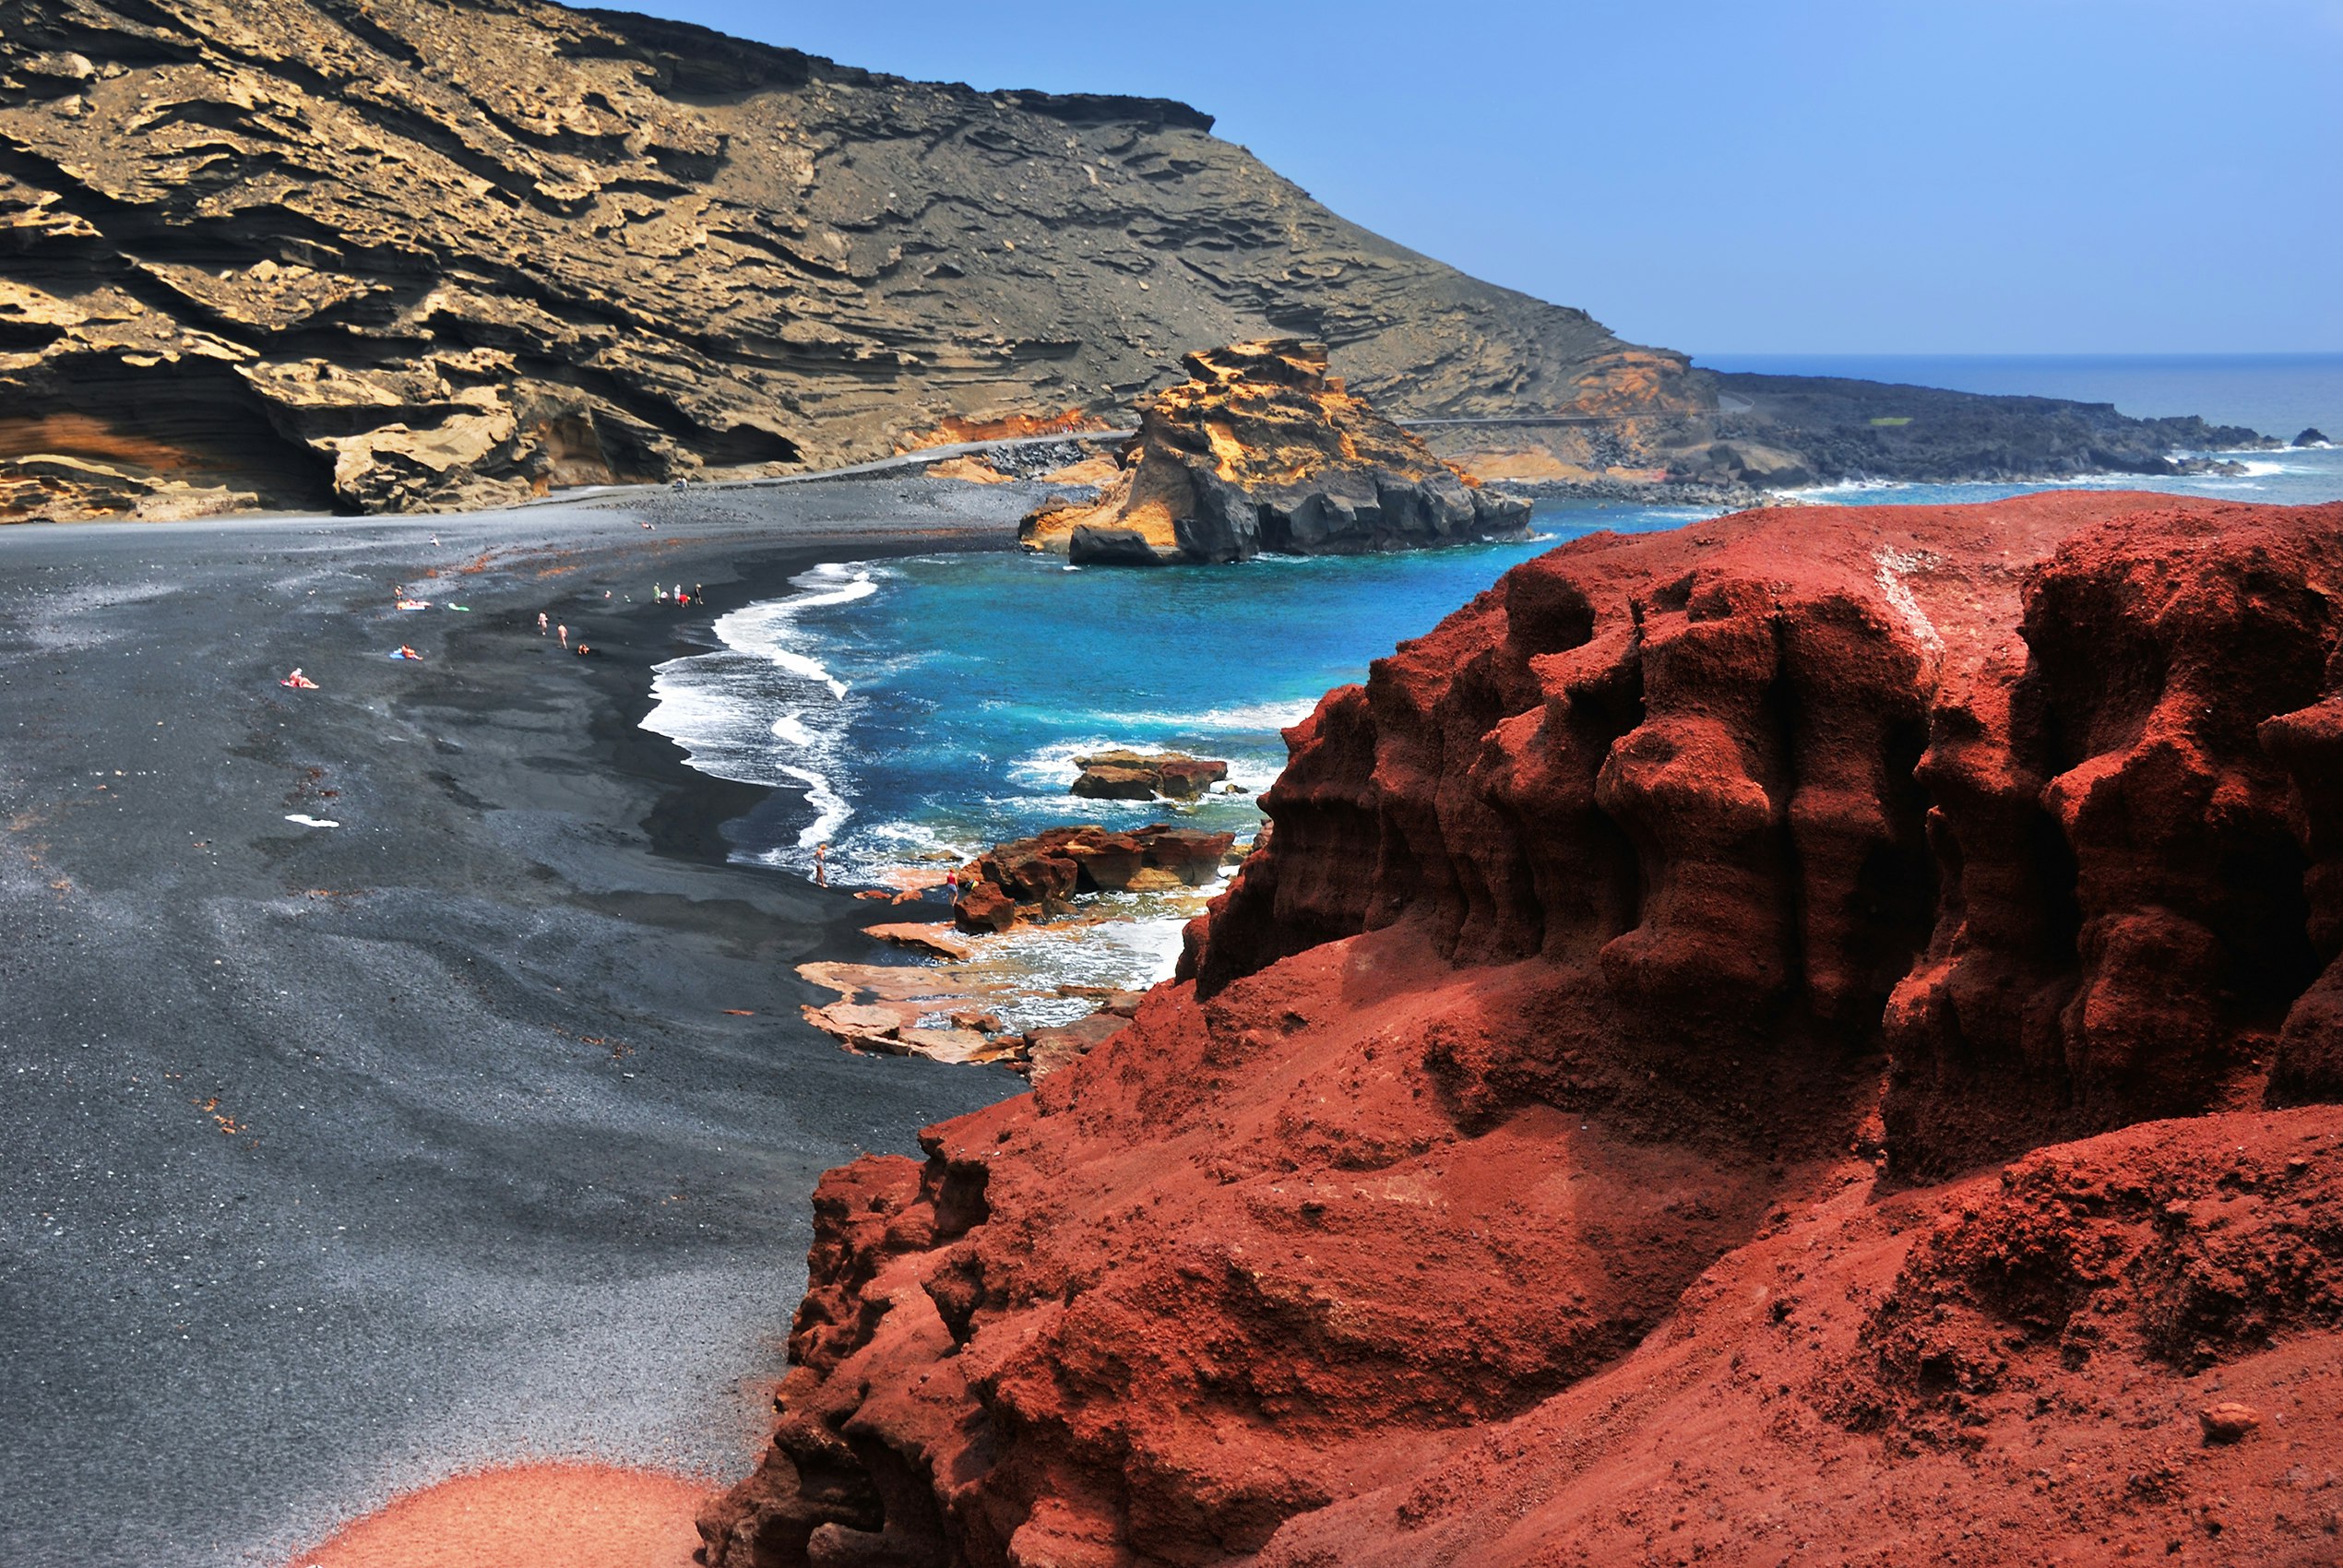 A black-sand beach with vivid red rocks in Lanzarote, Canary Islands